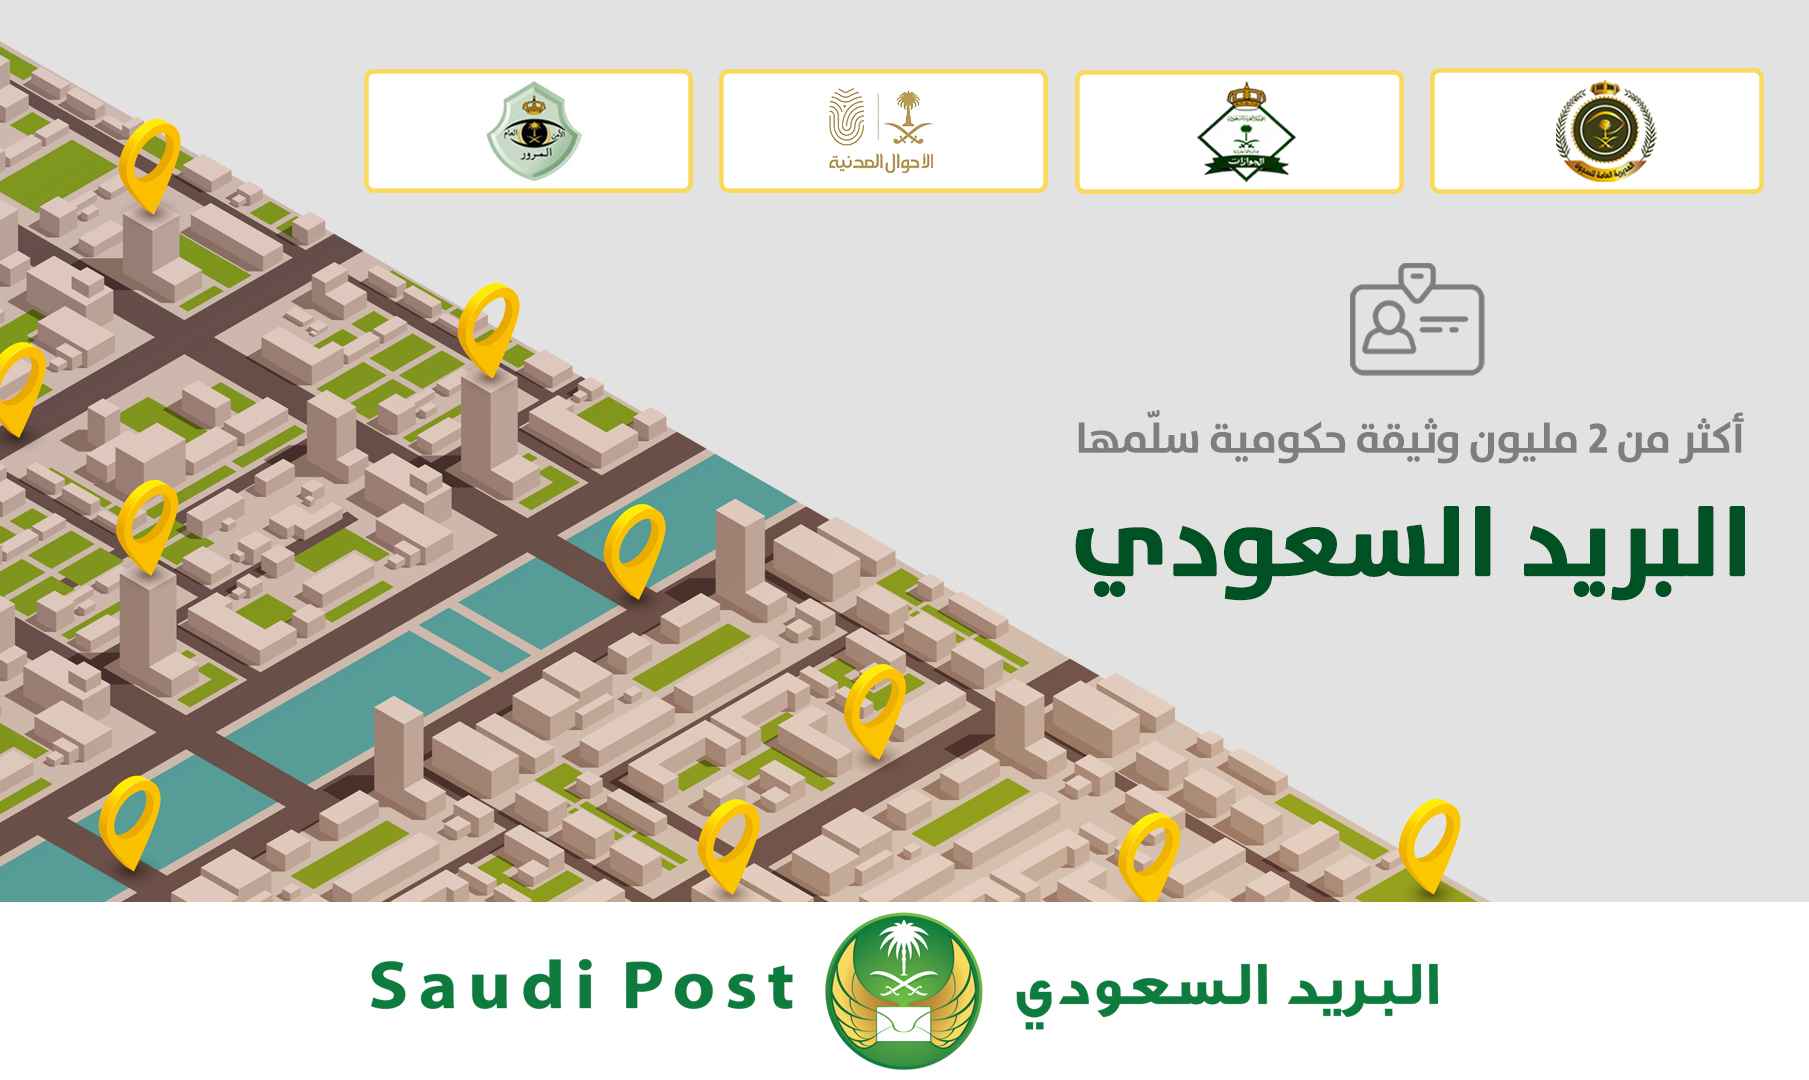 Saudi Post delivers more than 2 million Governmental Documents in 3 Years